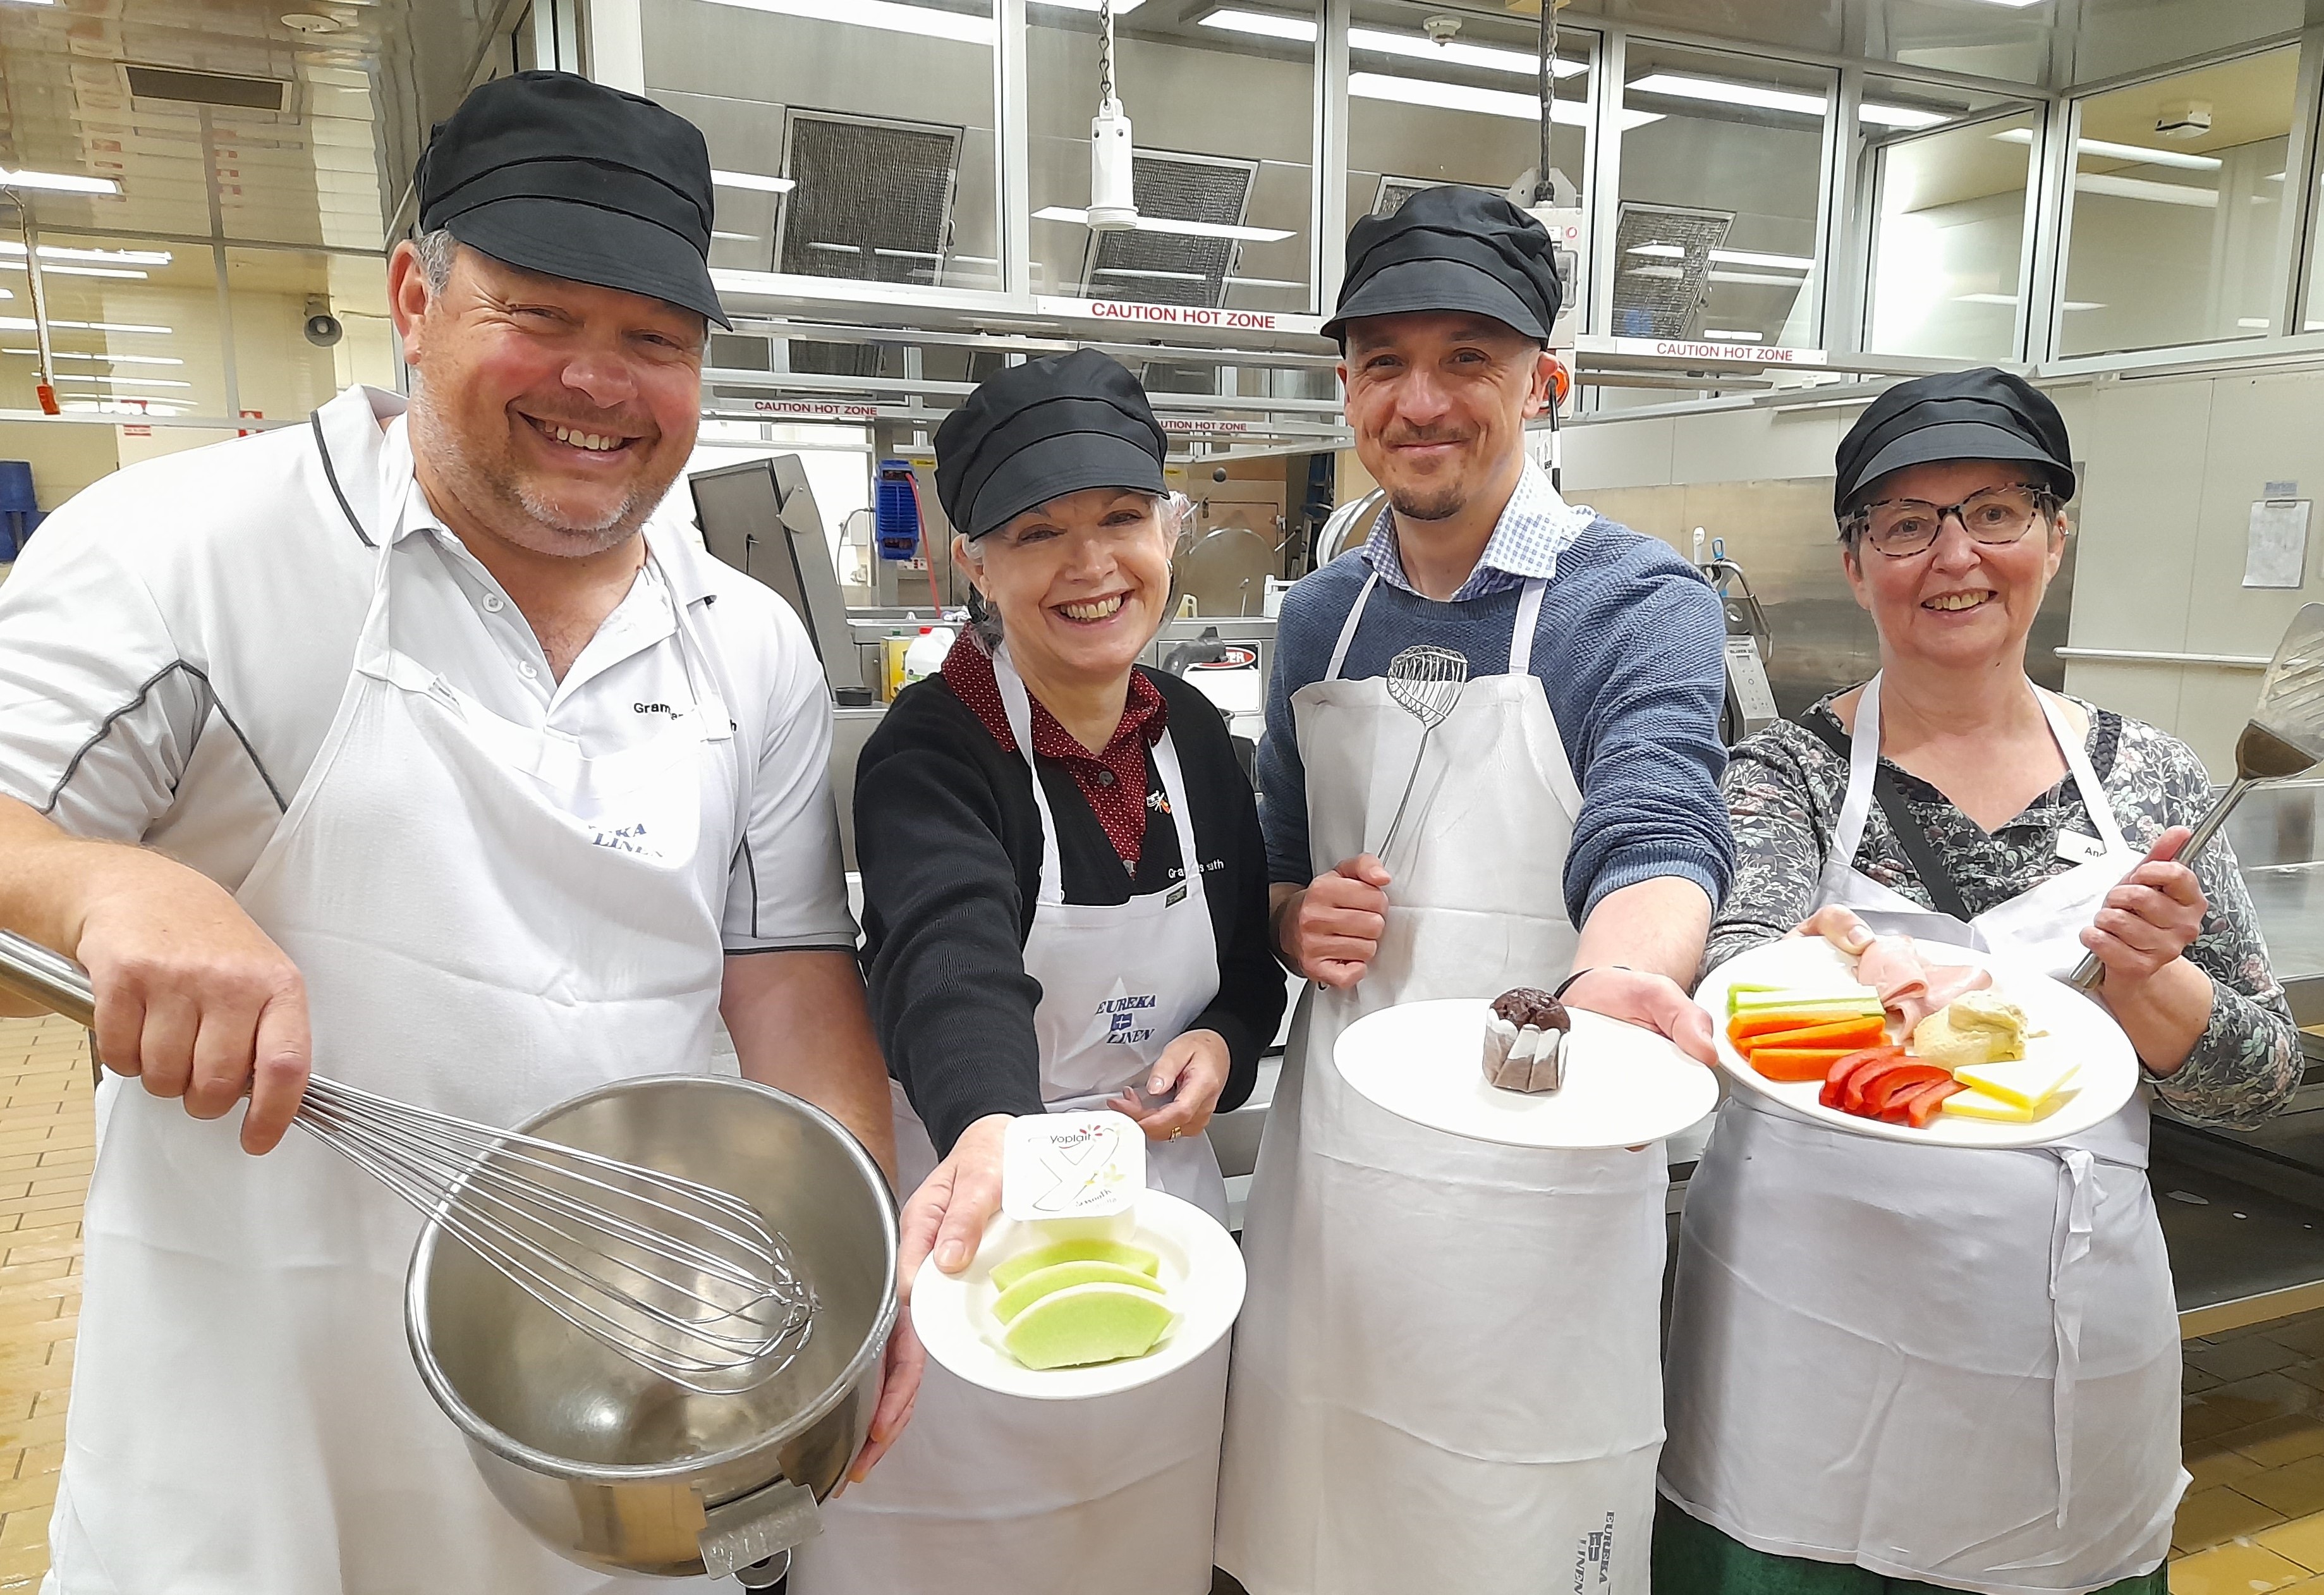 Grampians Health cooking up smiles ahead of World Food Day